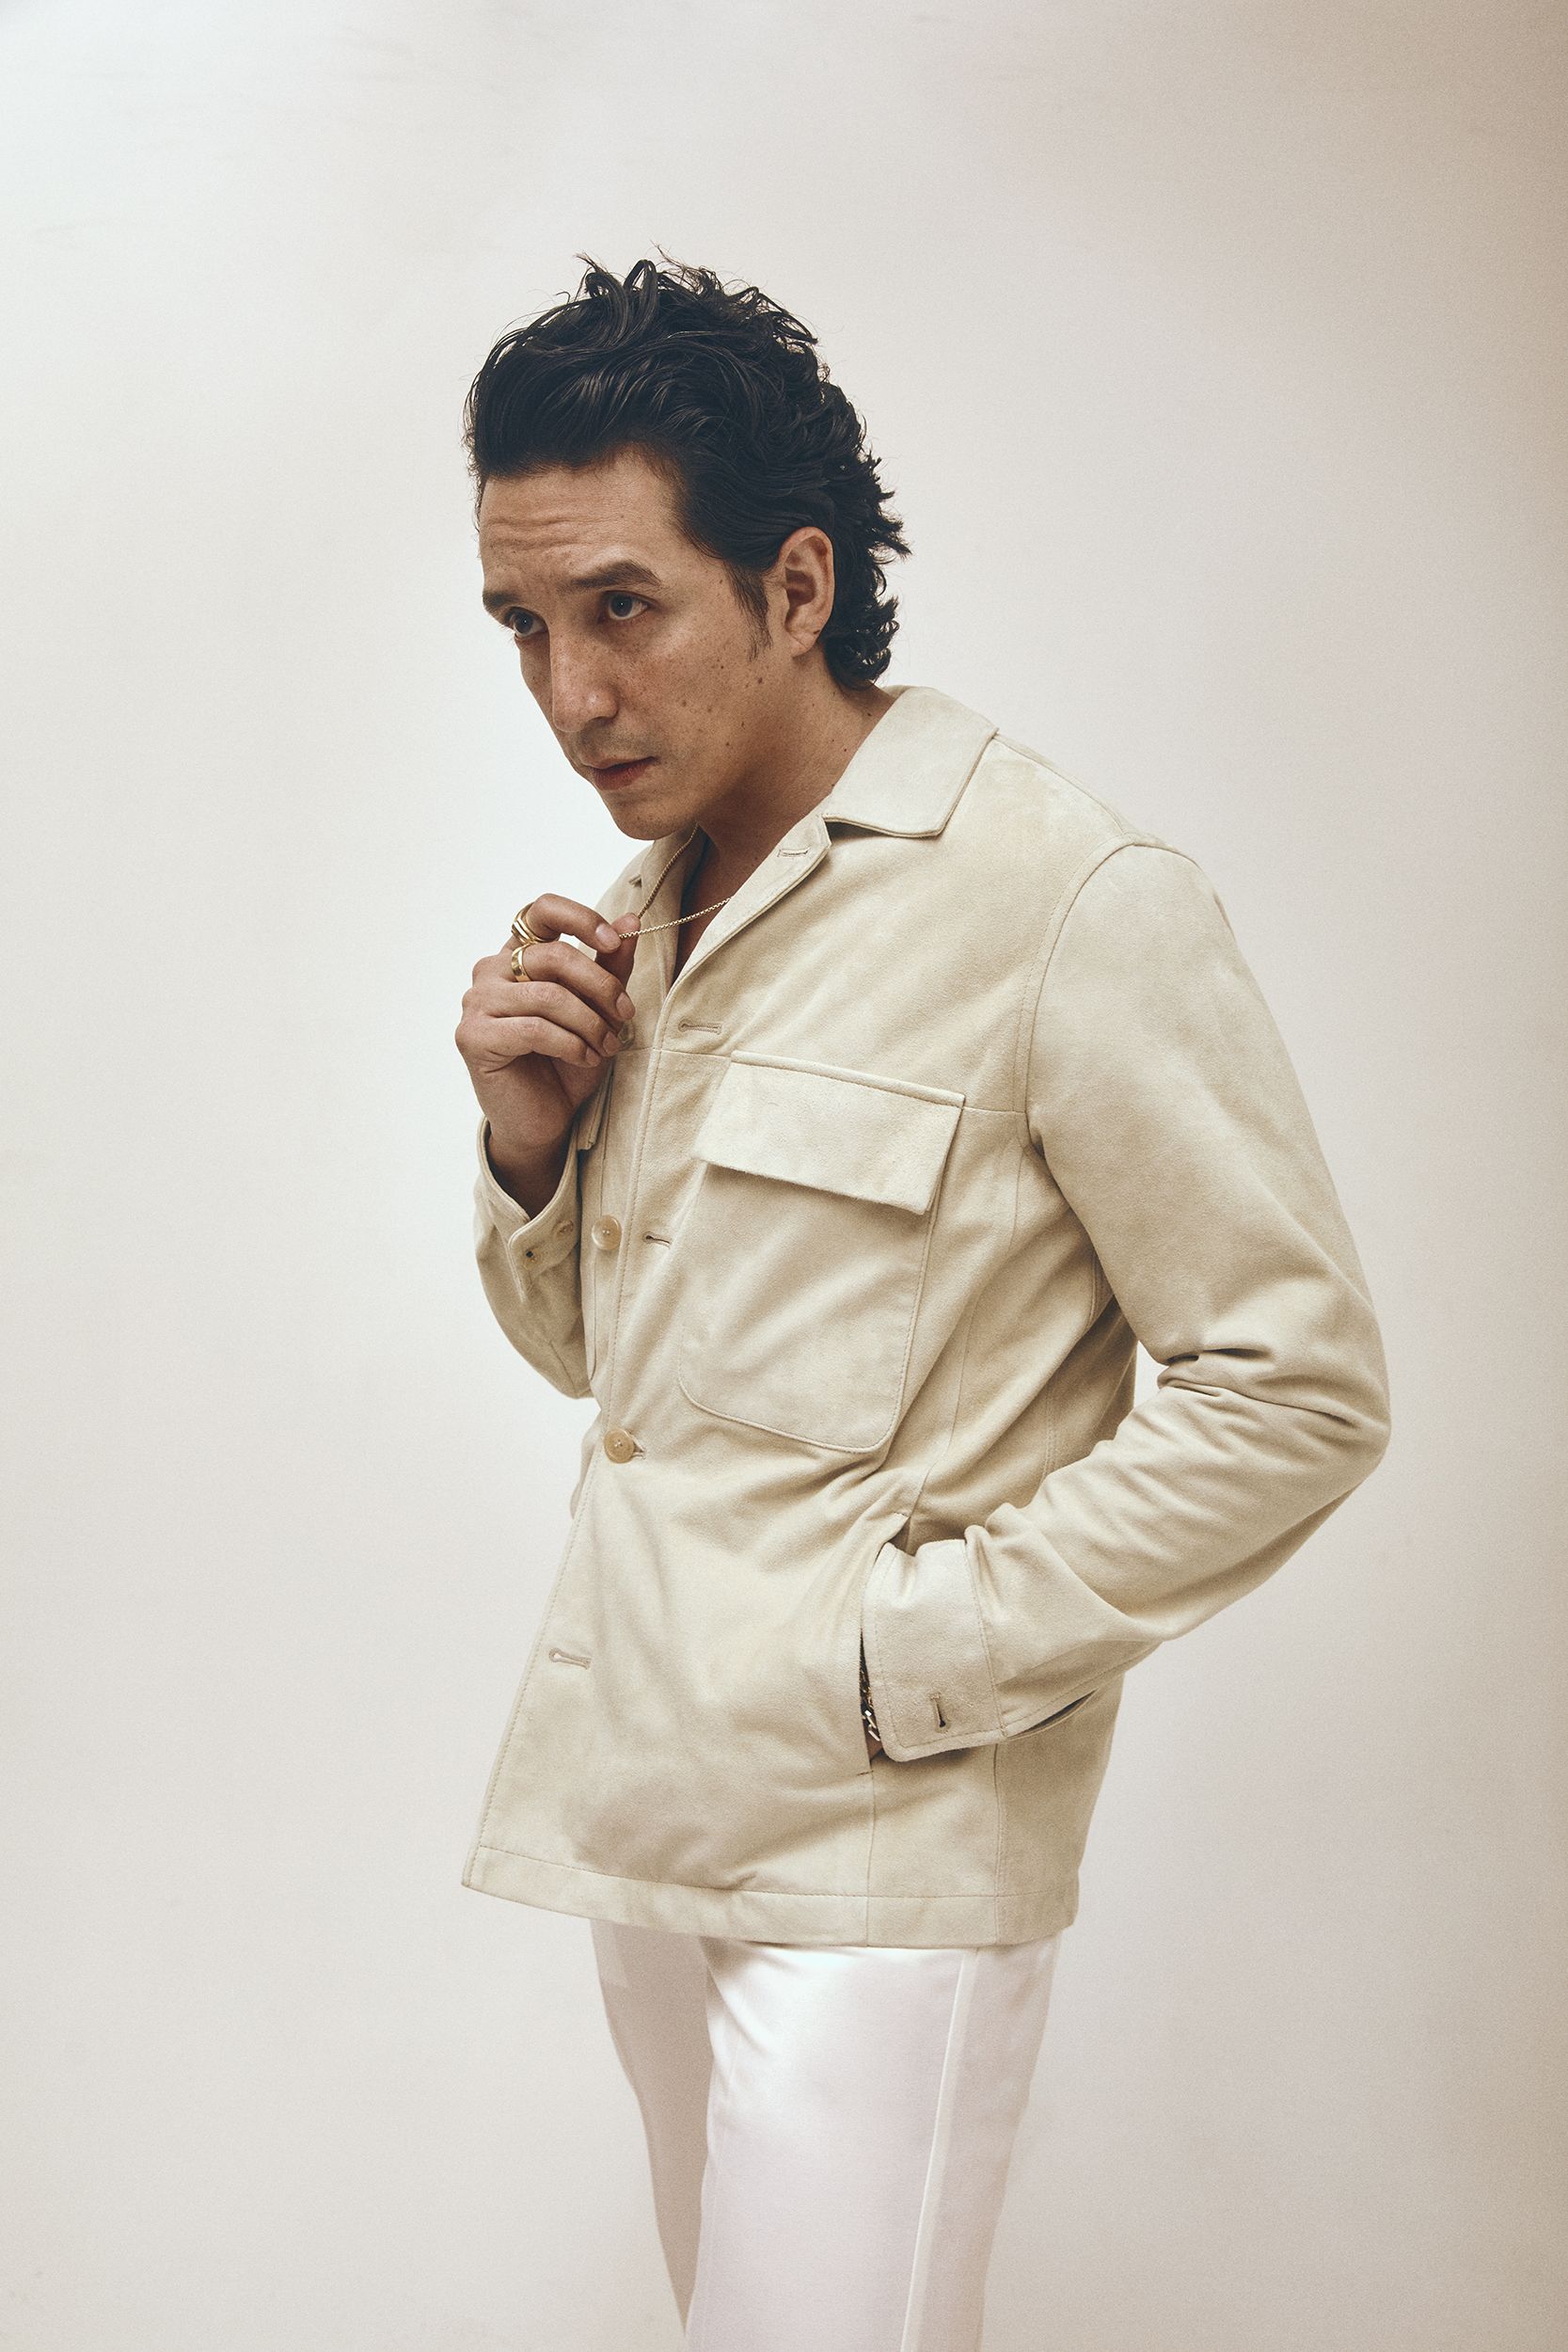 Who Plays Tommy in The Last of Us TV Show? Meet Gabriel Luna